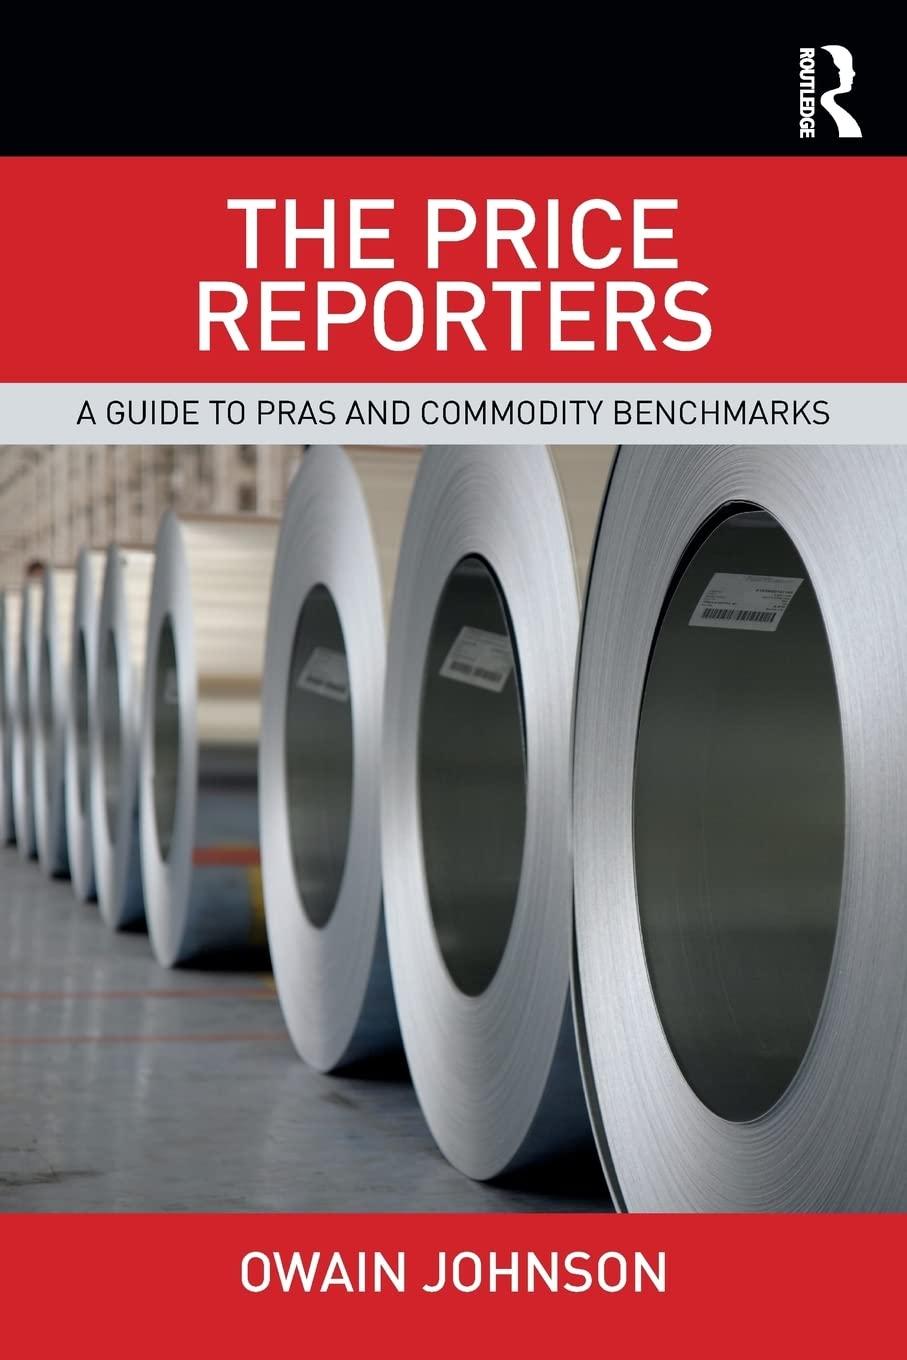 the price reporters a guide to pras and commodity benchmarks 1st edition owain johnson 1138721565,